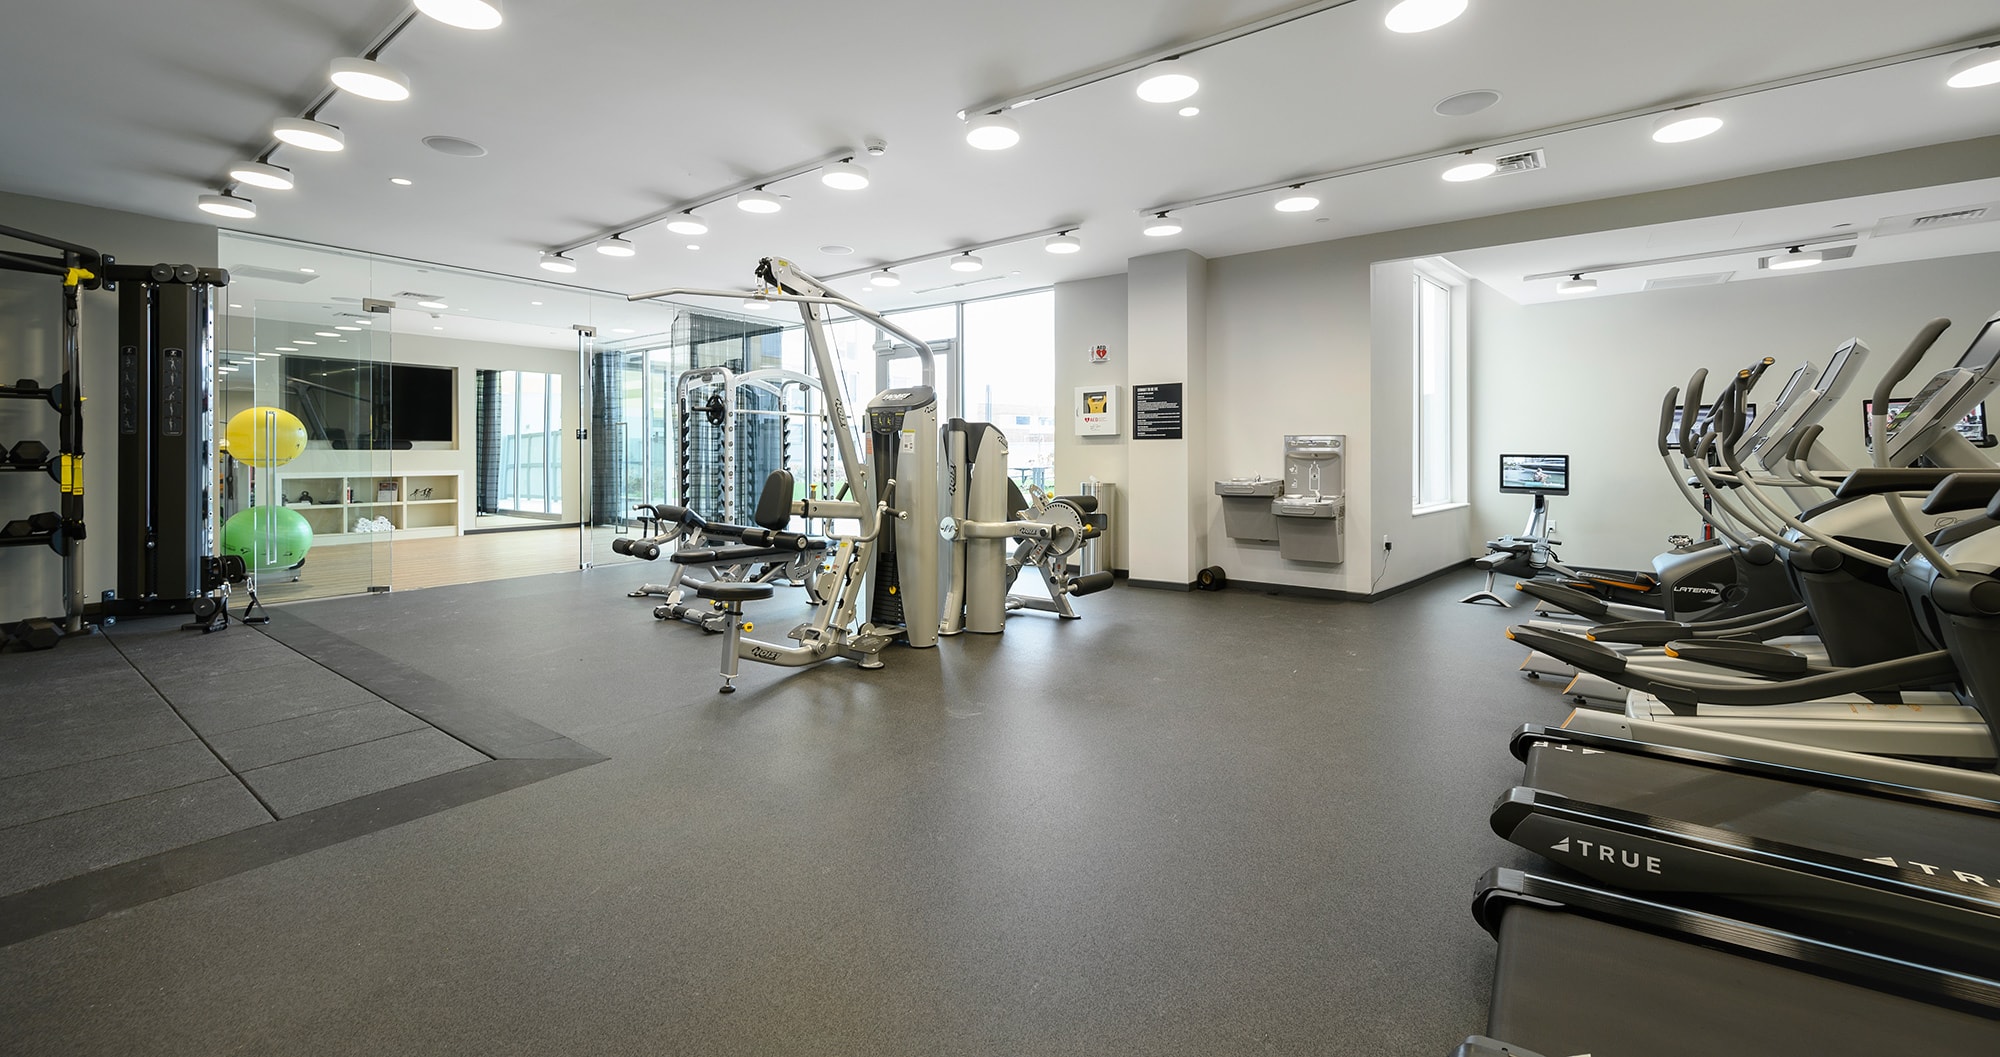 Spacious gym with free weights and treadmills